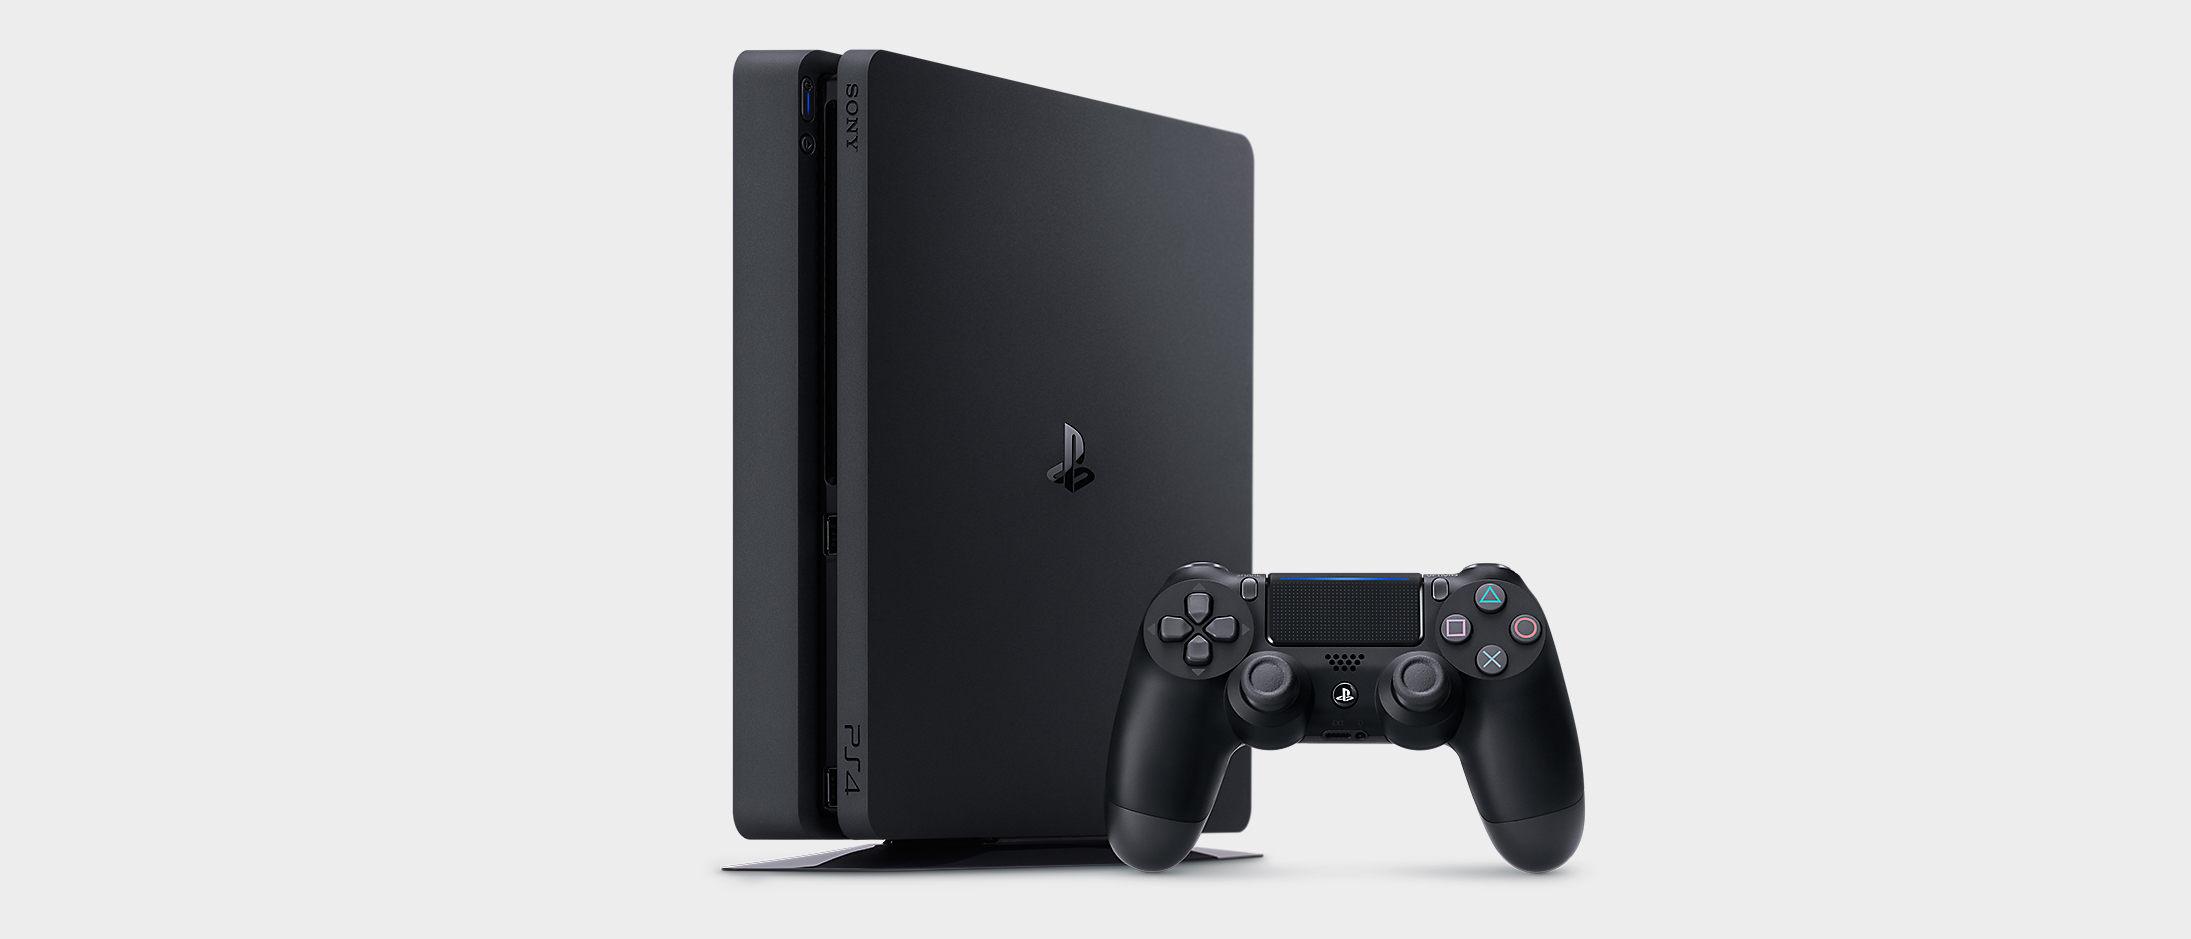 ps4 500gb f chassis black